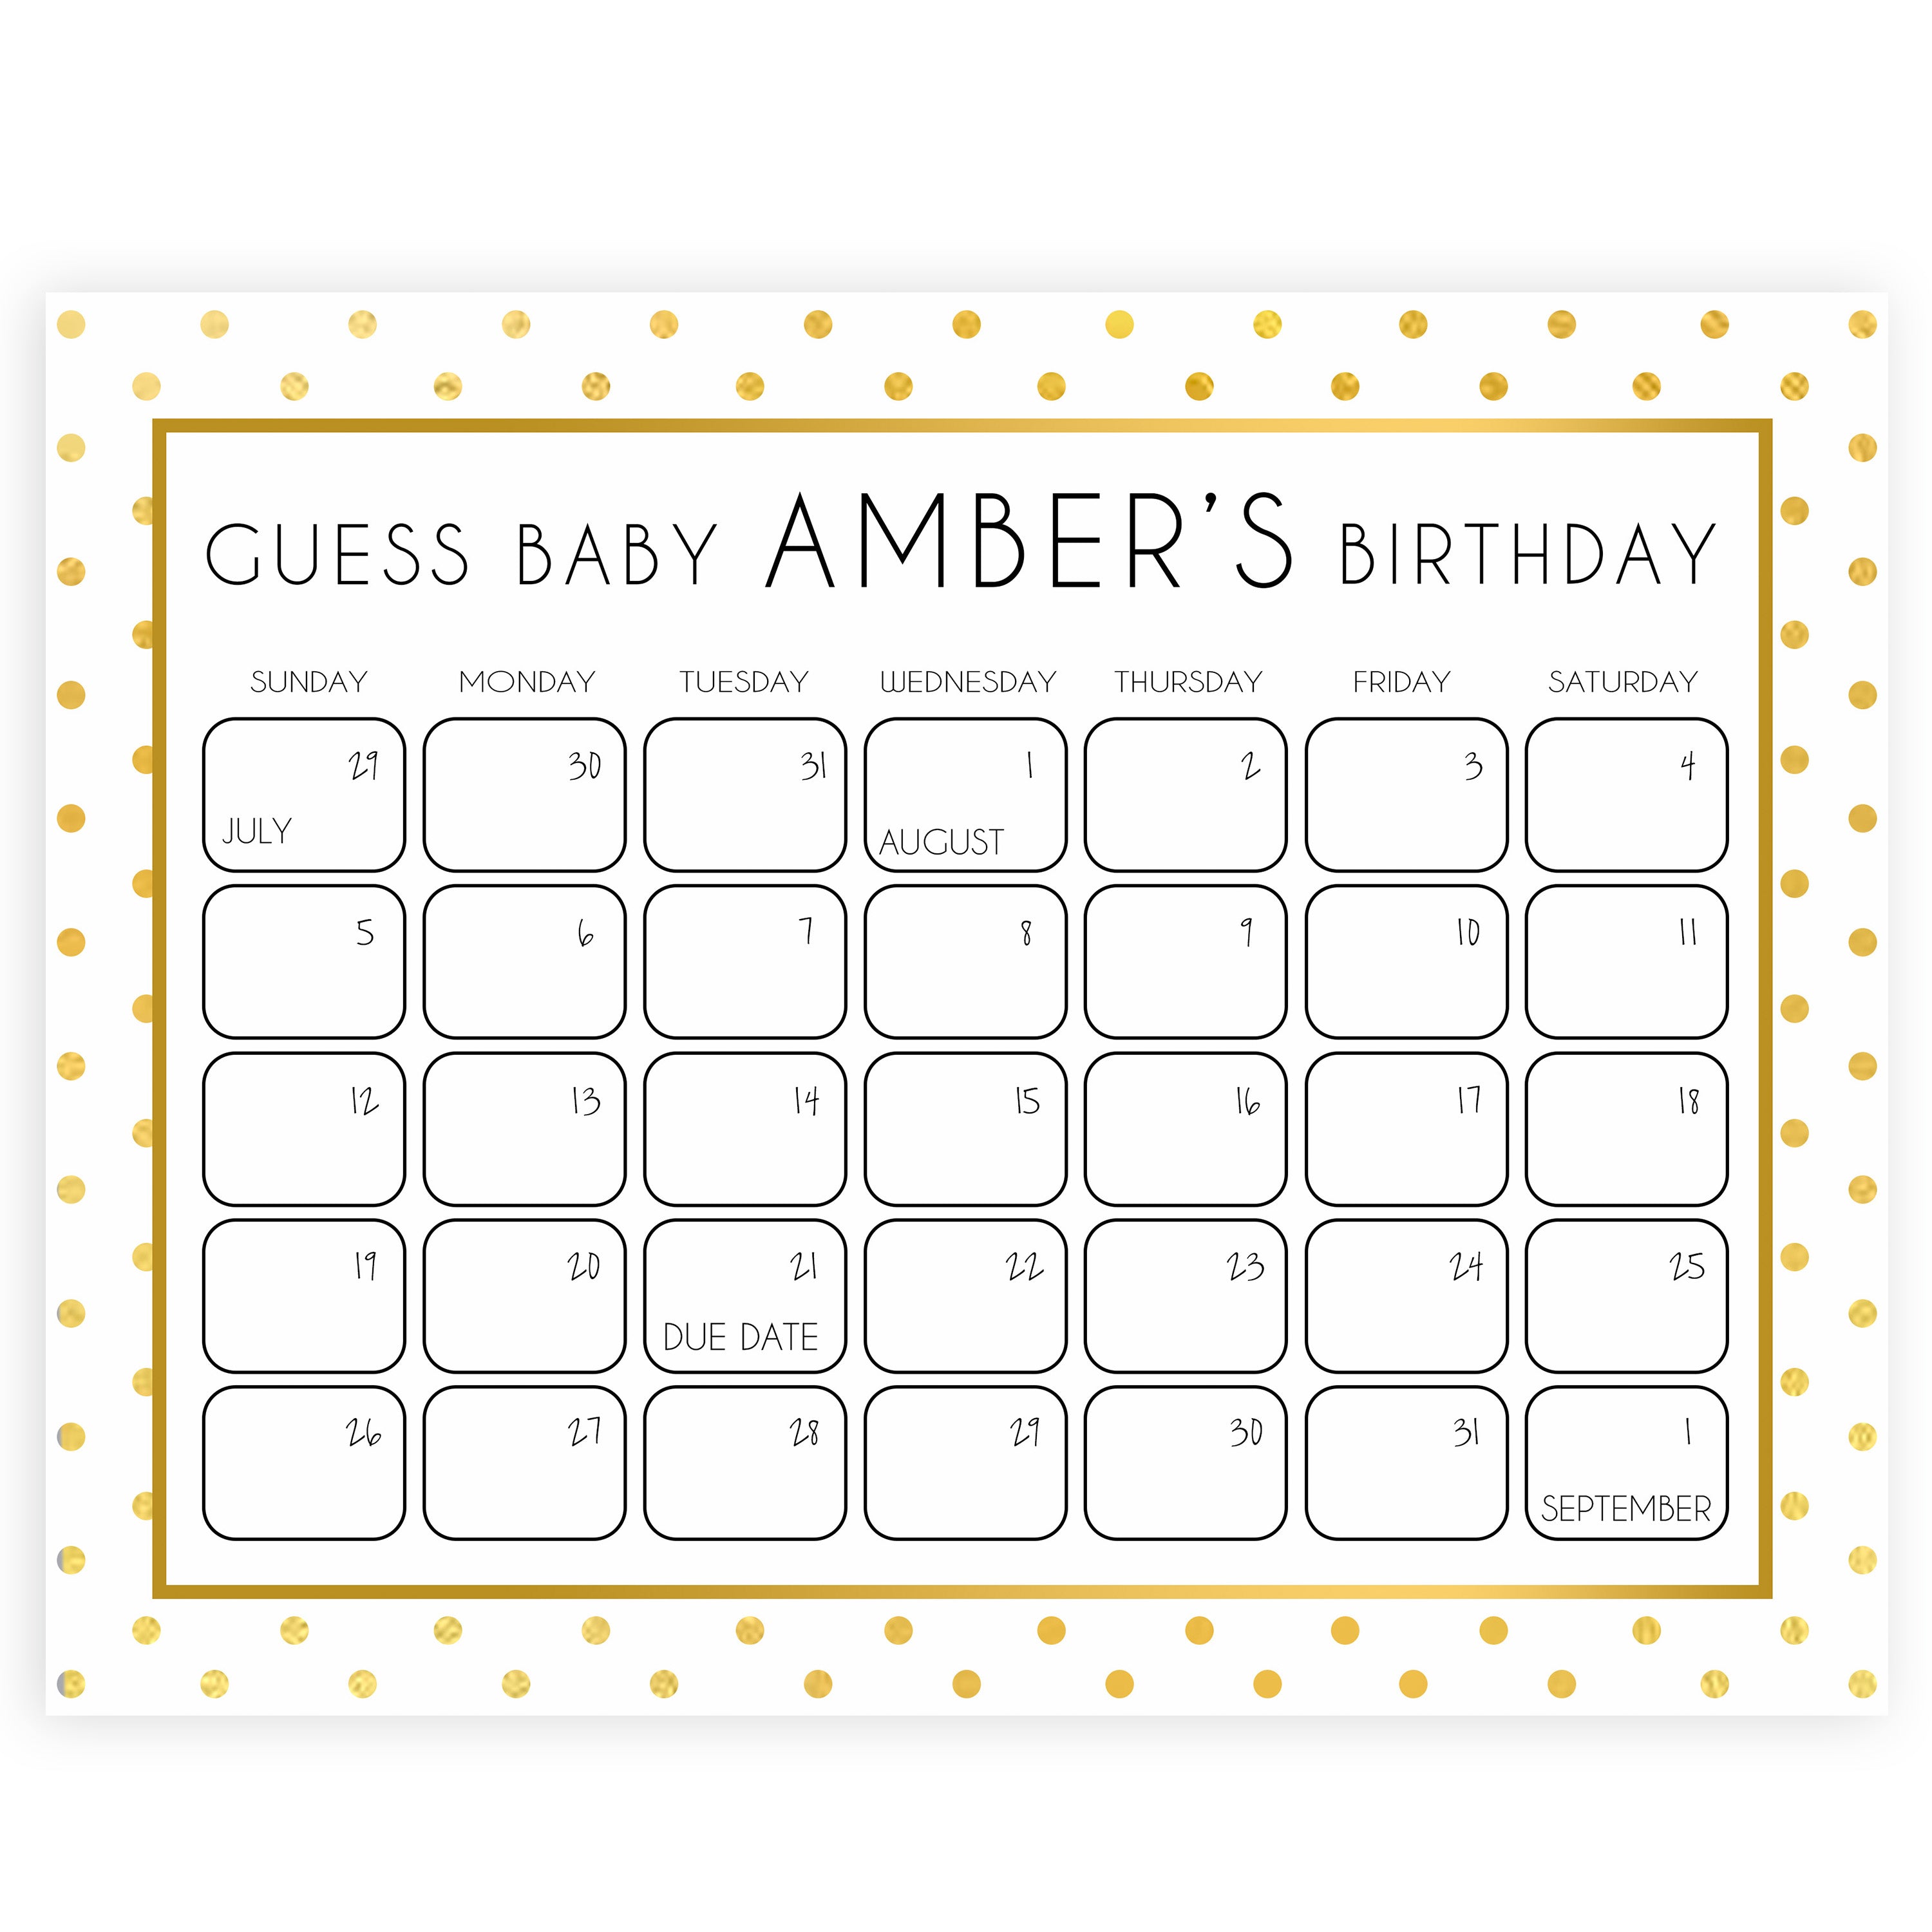 guess the baby birthday game, baby birth predictions game, printable baby shower games, fun baby shower games, gold baby shower games, gold baby shower decor